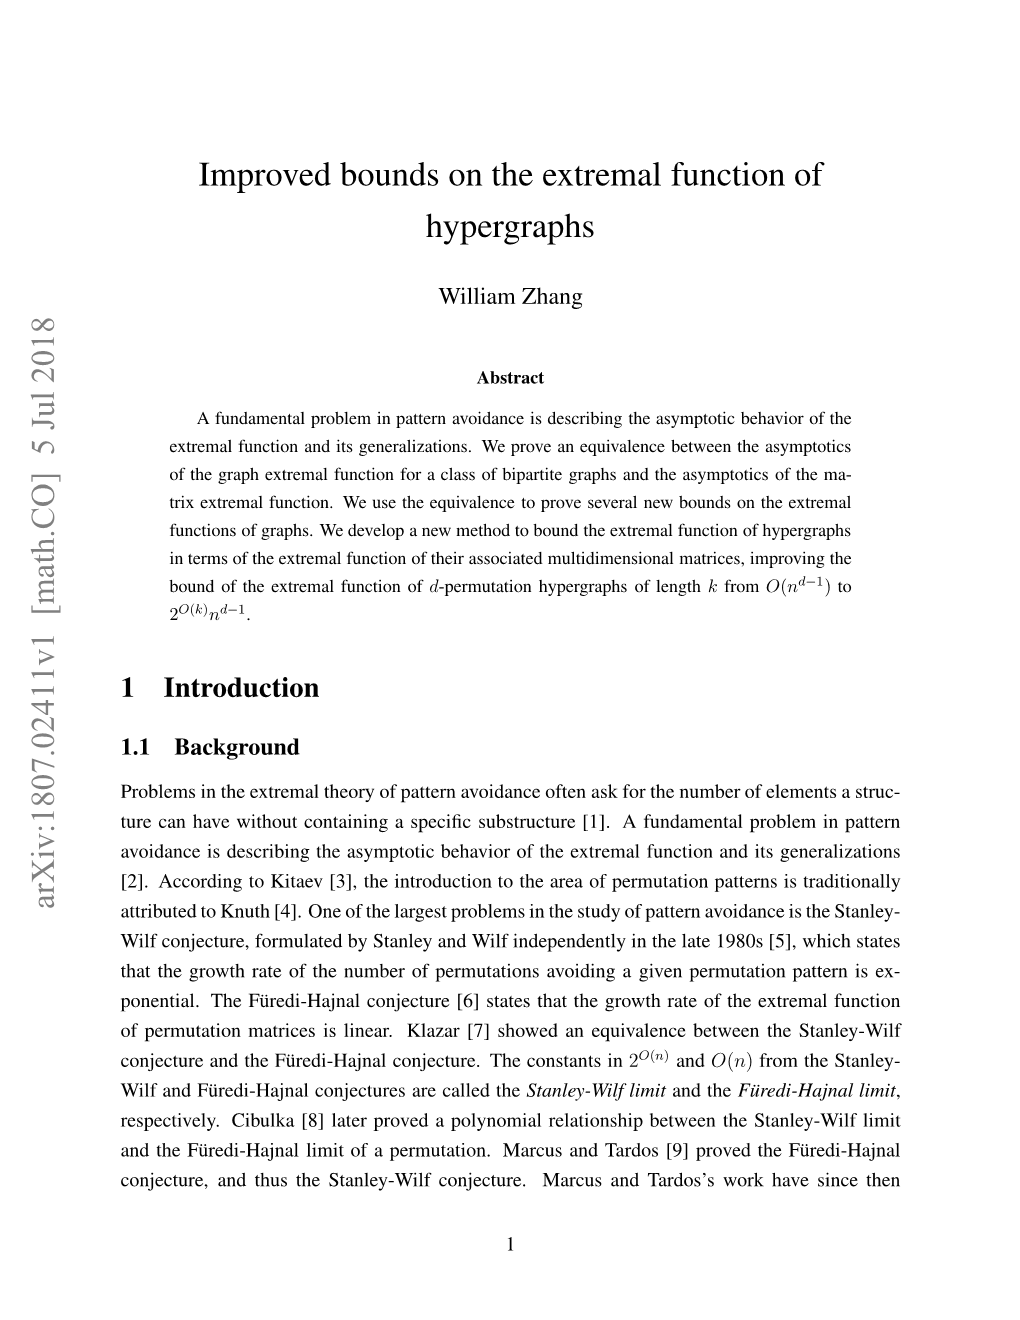 Improved Bounds on the Extremal Function of Hypergraphs